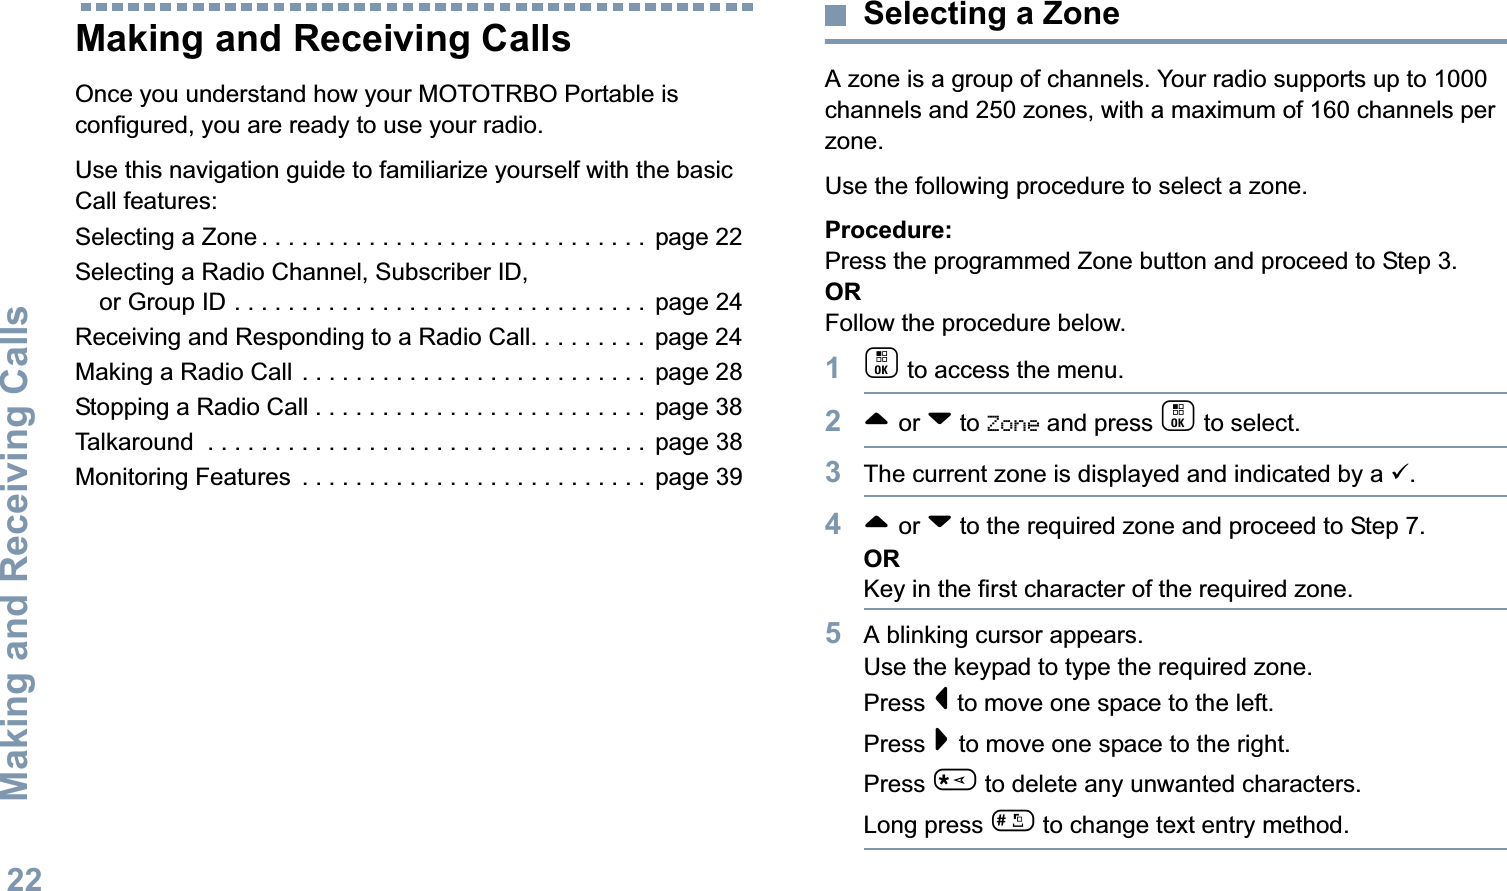 Making and Receiving CallsEnglish22Making and Receiving CallsOnce you understand how your MOTOTRBO Portable is configured, you are ready to use your radio.Use this navigation guide to familiarize yourself with the basic Call features:Selecting a Zone . . . . . . . . . . . . . . . . . . . . . . . . . . . . .  page 22Selecting a Radio Channel, Subscriber ID, or Group ID . . . . . . . . . . . . . . . . . . . . . . . . . . . . . . .  page 24Receiving and Responding to a Radio Call. . . . . . . . .  page 24Making a Radio Call . . . . . . . . . . . . . . . . . . . . . . . . . .  page 28Stopping a Radio Call . . . . . . . . . . . . . . . . . . . . . . . . .  page 38Talkaround  . . . . . . . . . . . . . . . . . . . . . . . . . . . . . . . . .  page 38Monitoring Features  . . . . . . . . . . . . . . . . . . . . . . . . . .  page 39Selecting a ZoneA zone is a group of channels. Your radio supports up to 1000 channels and 250 zones, with a maximum of 160 channels per zone.Use the following procedure to select a zone.Procedure:Press the programmed Zone button and proceed to Step 3. ORFollow the procedure below.1c to access the menu.2^ or v to Zone and press c to select. 3The current zone is displayed and indicated by a 9.4^ or v to the required zone and proceed to Step 7.ORKey in the first character of the required zone.5A blinking cursor appears.Use the keypad to type the required zone.Press &lt; to move one space to the left.Press &gt; to move one space to the right.Press * to delete any unwanted characters.Long press # to change text entry method.